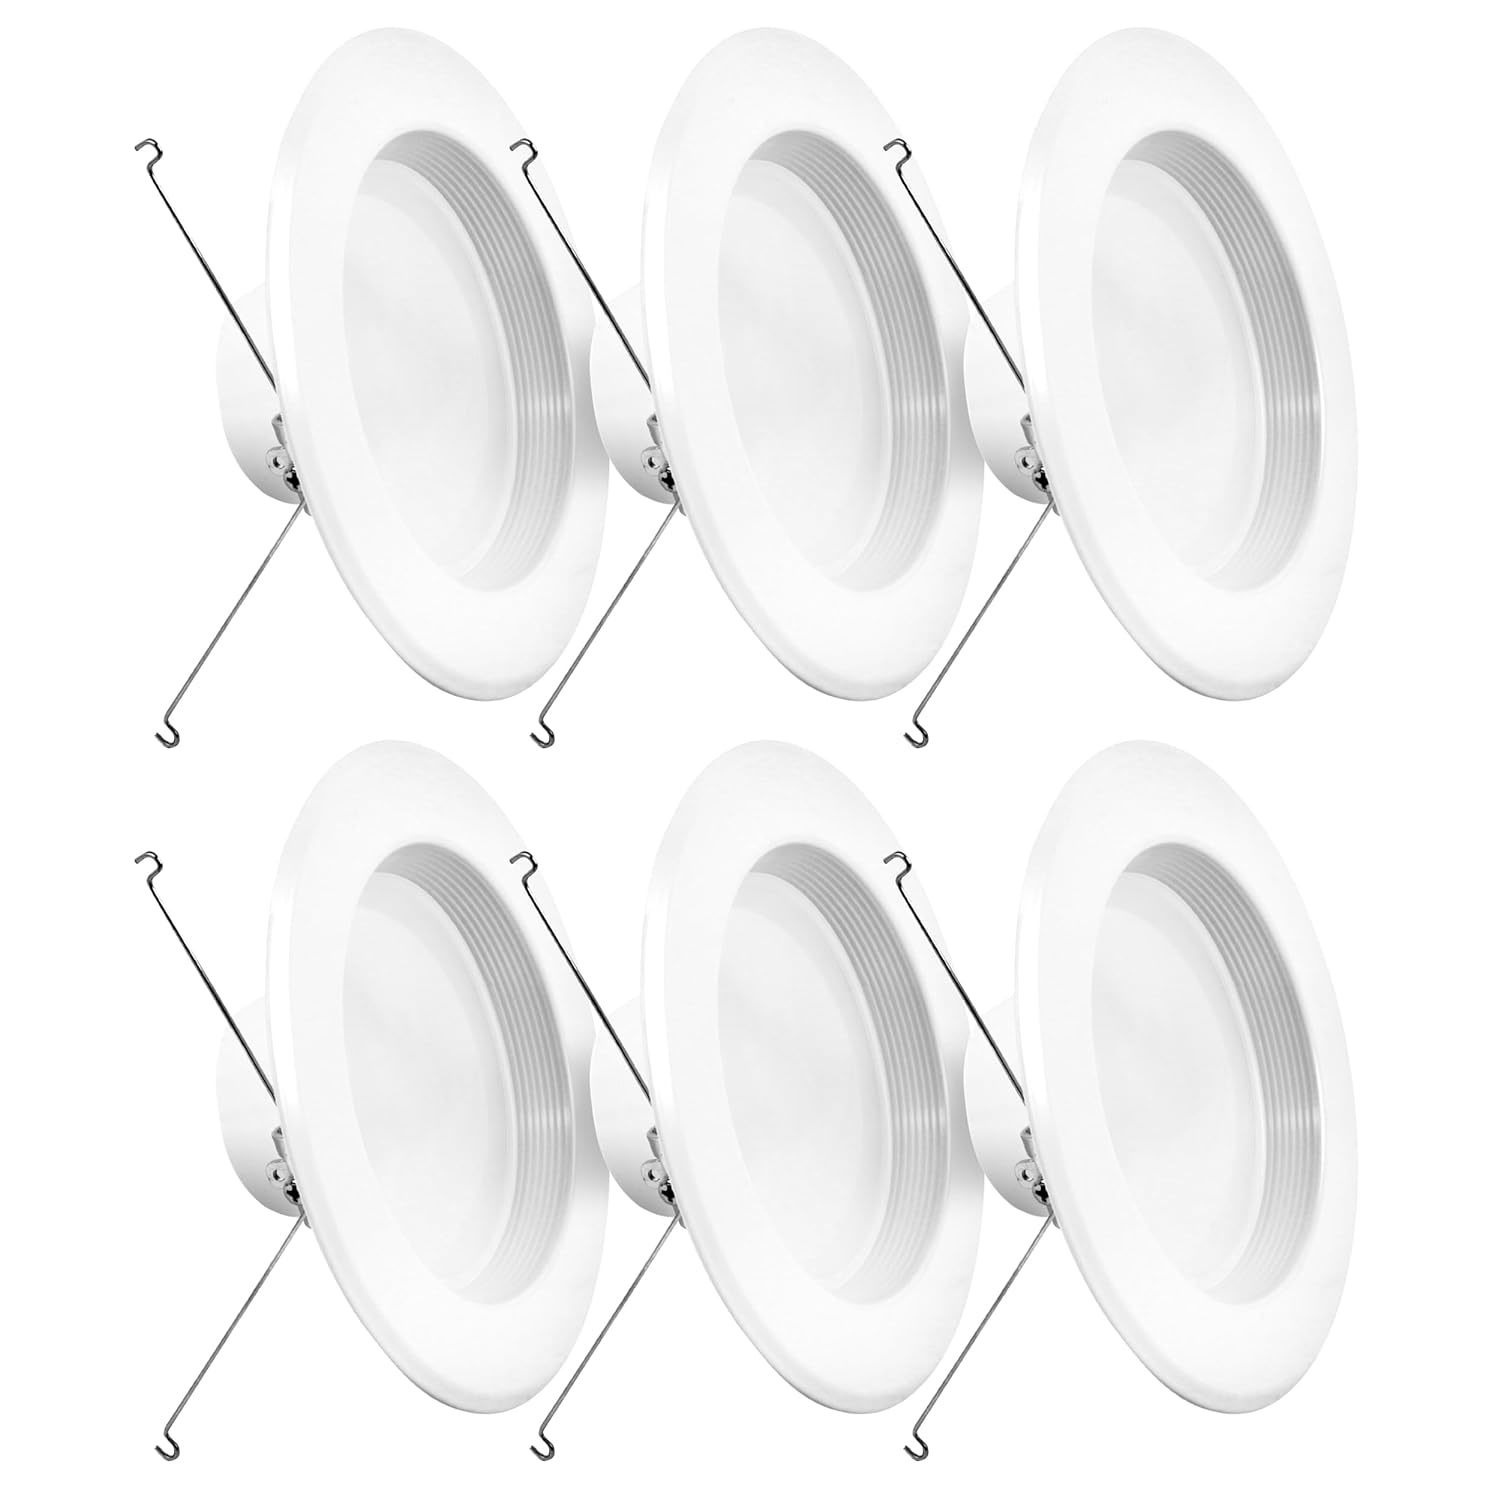 Feit Electric LED Recessed Downlight, fit Most 5-6" Housing Cans, Baffle Trim, D - $73.99